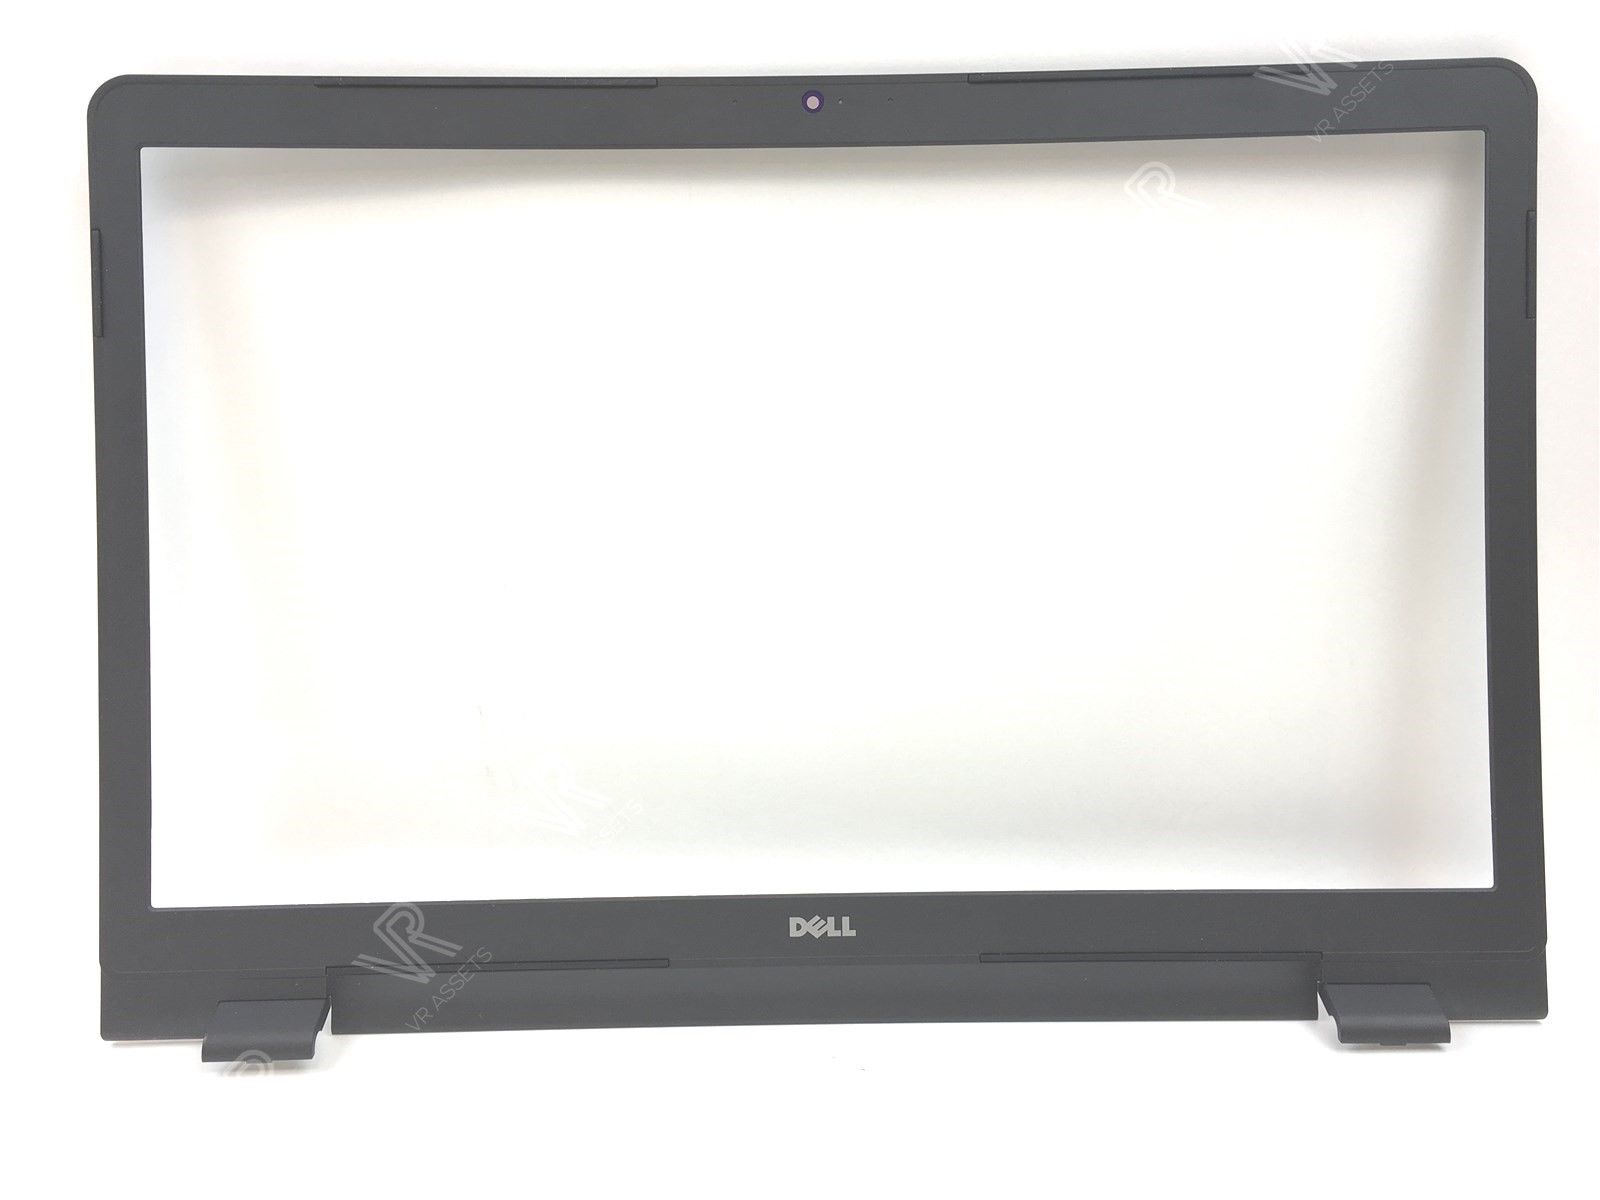 Dell Inspiron 5755 LCD Display Front Bezel Cover Black GC07D 0GC07D